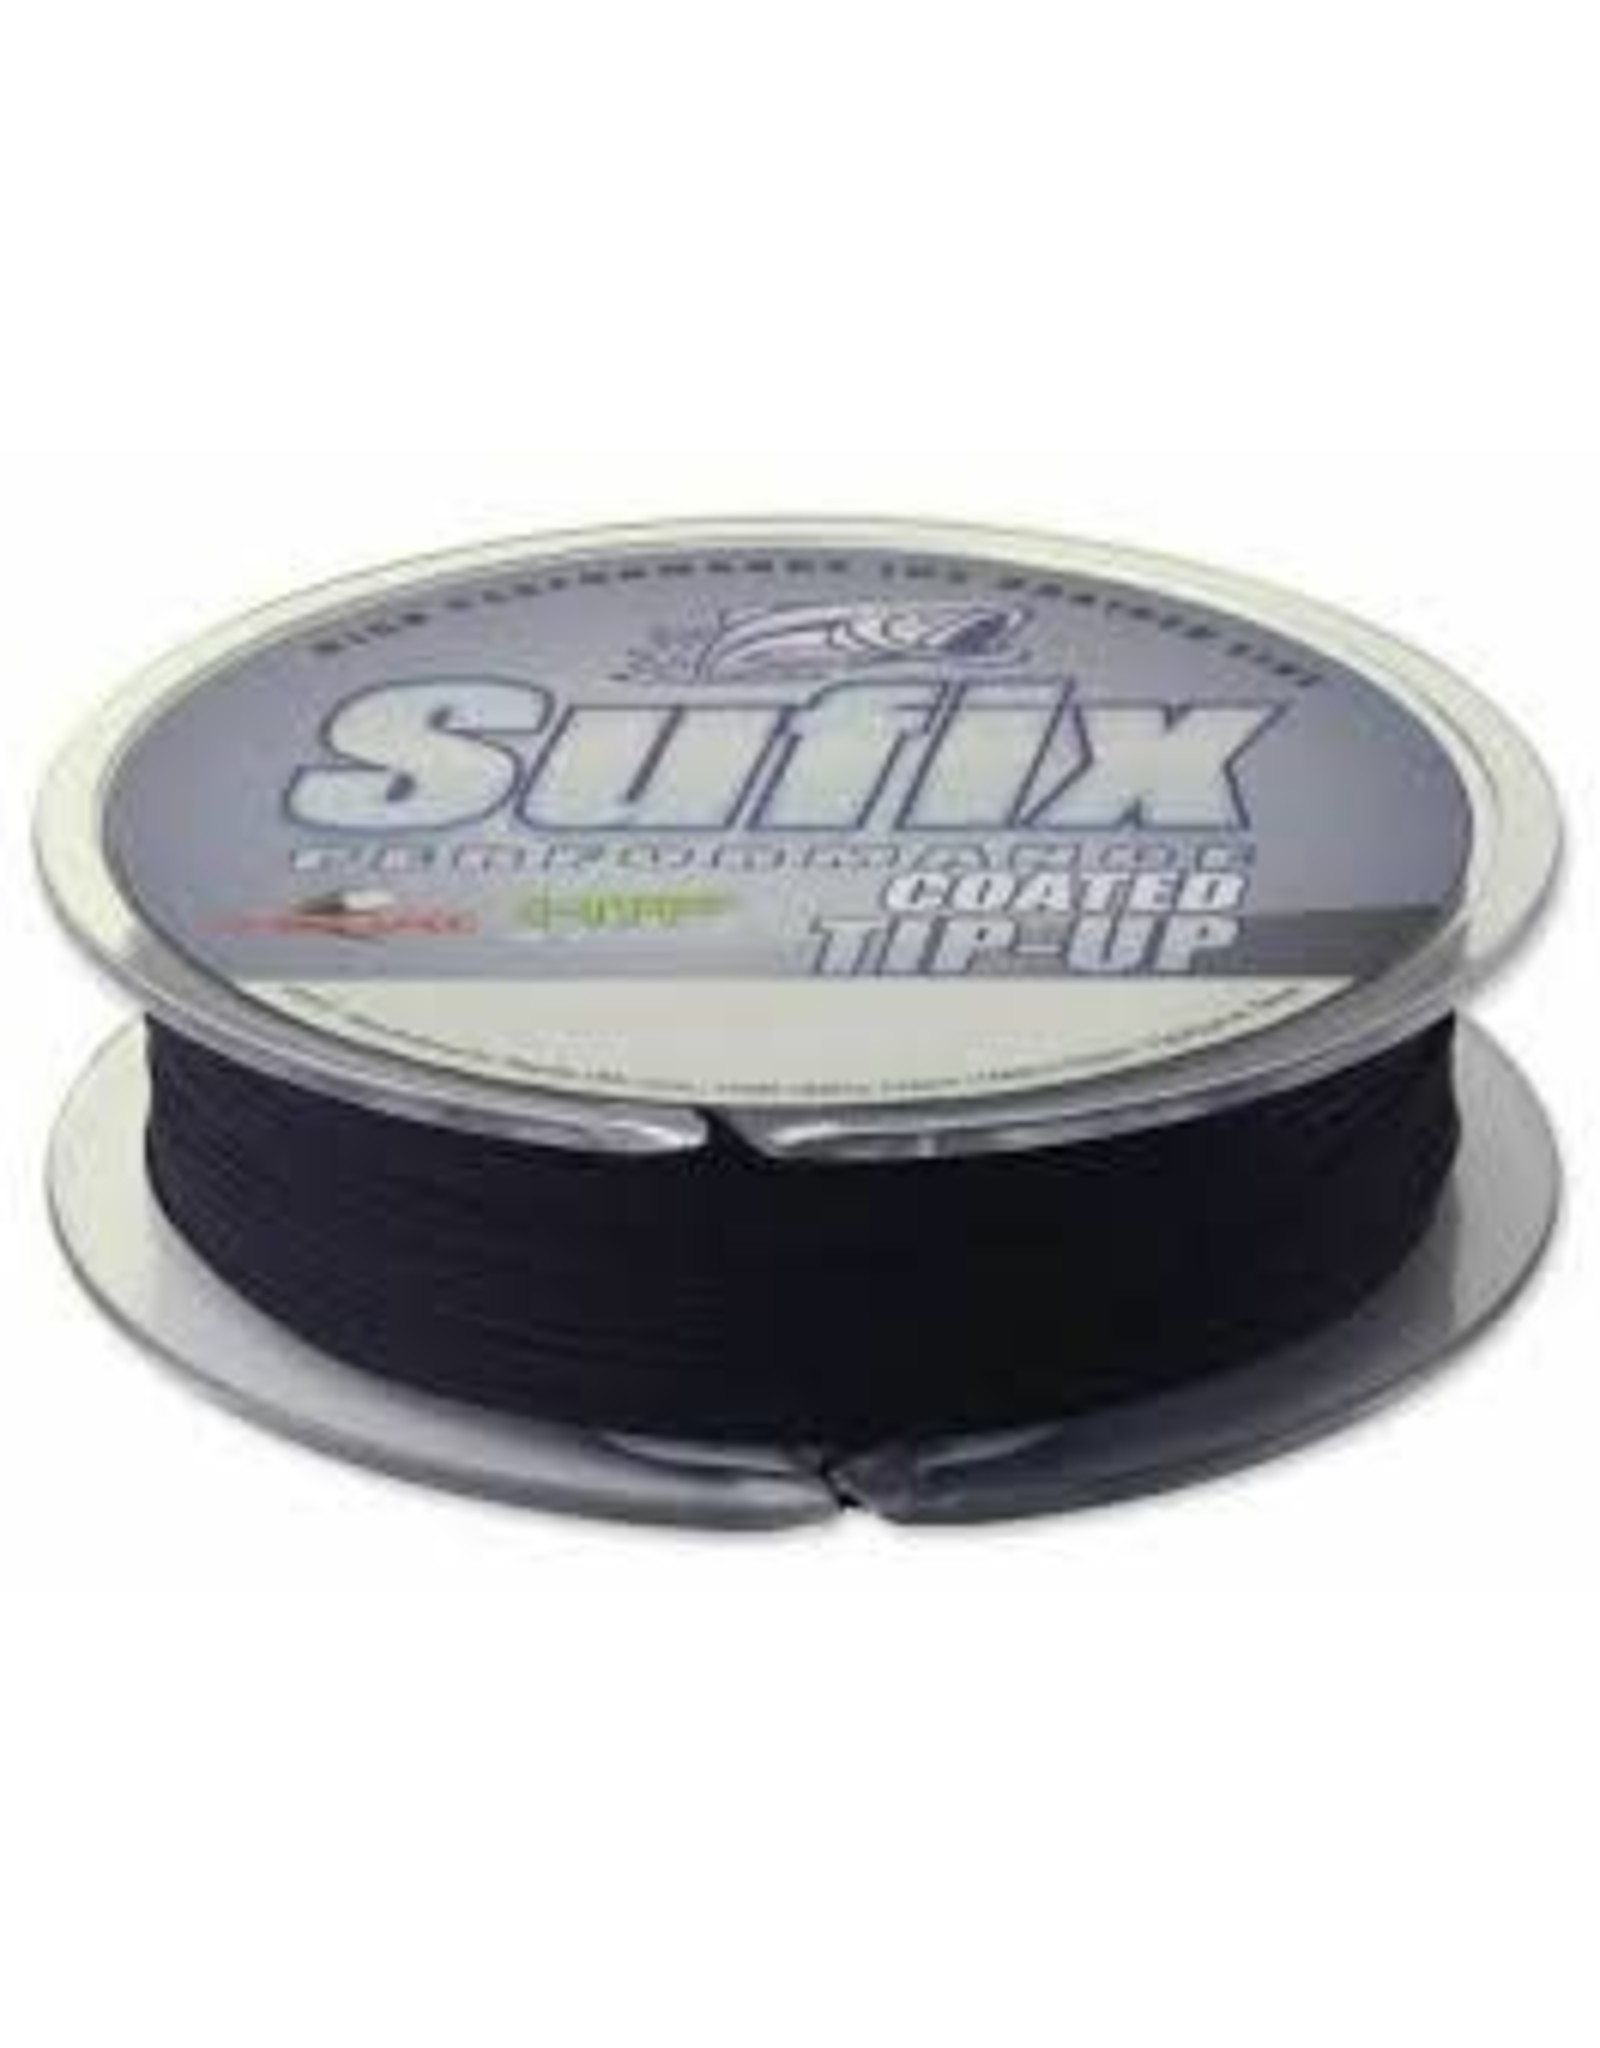 SUFIX SUFIX COATED TIP-UP ICE FISHING LINE BLACK